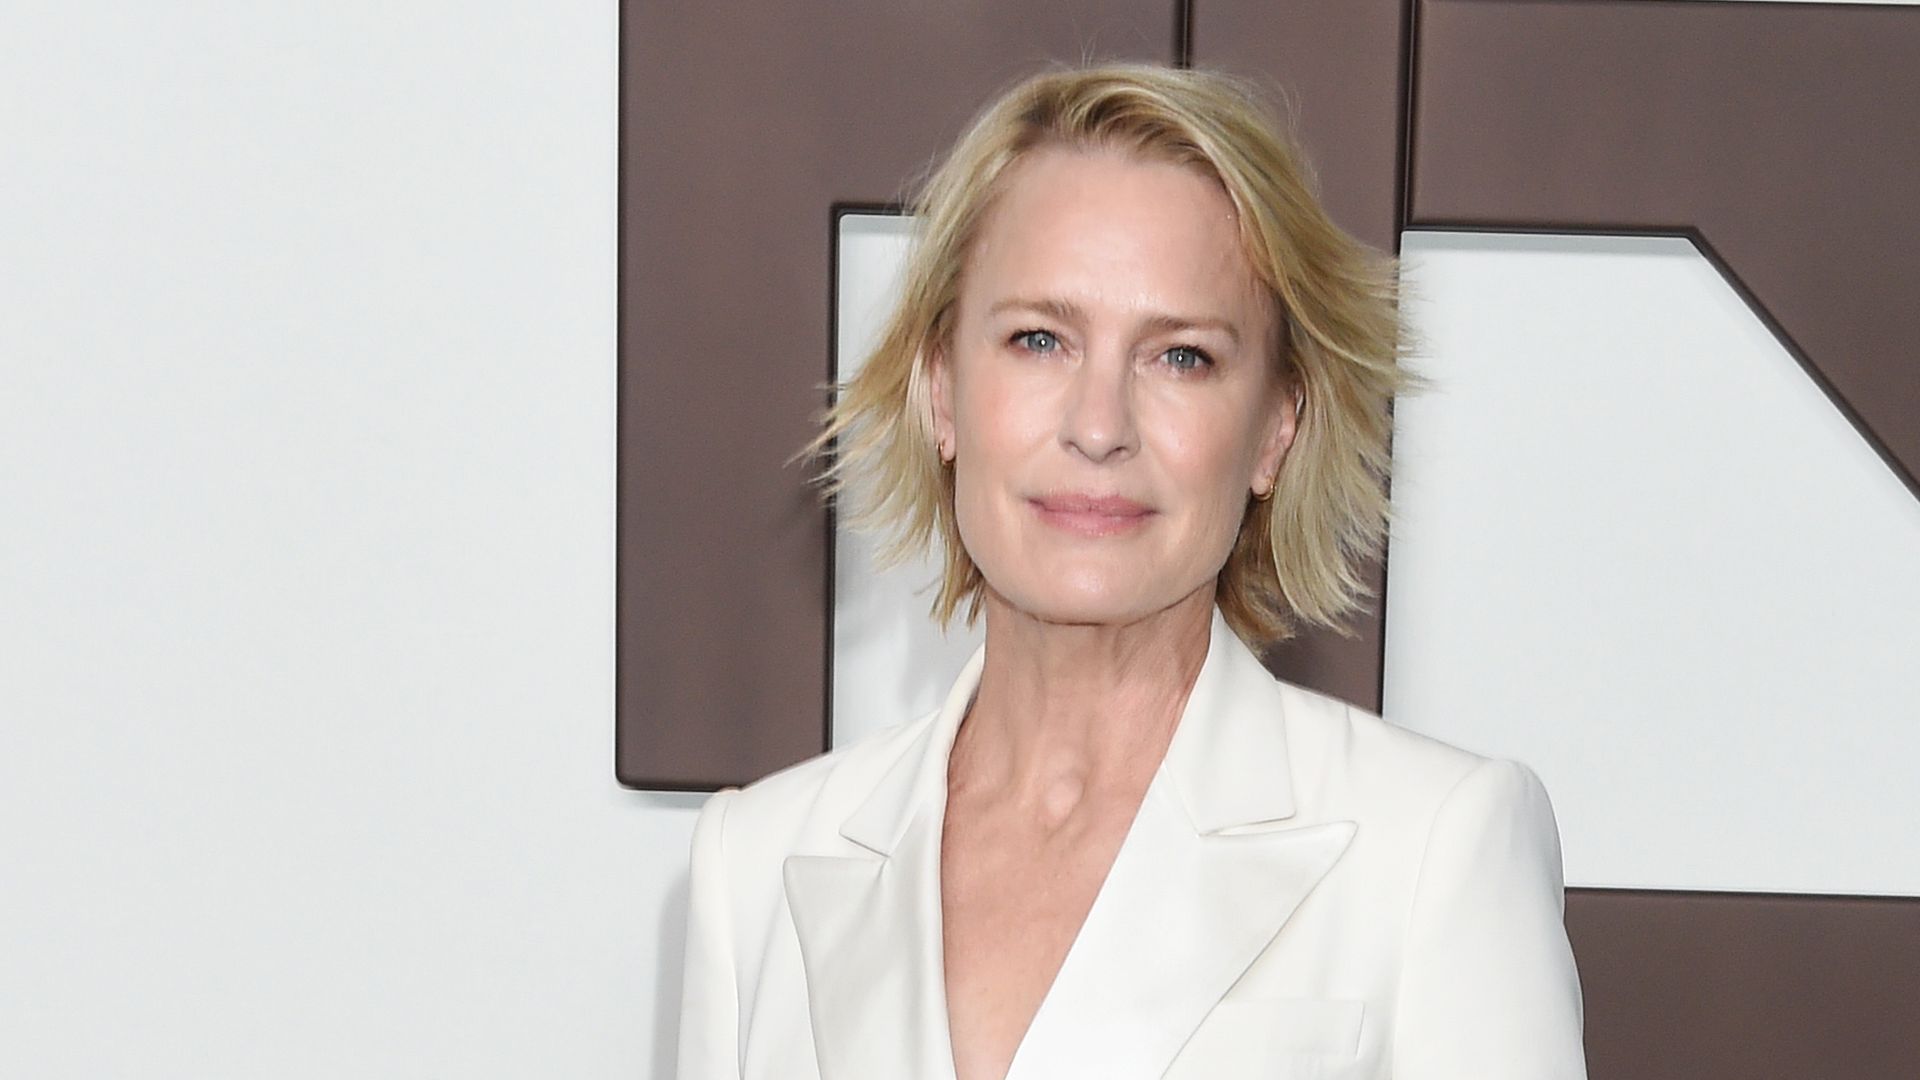 Robin Wright looks as ethereal as ever in a plunging fitted white floor-length dress from rare high-profile outing